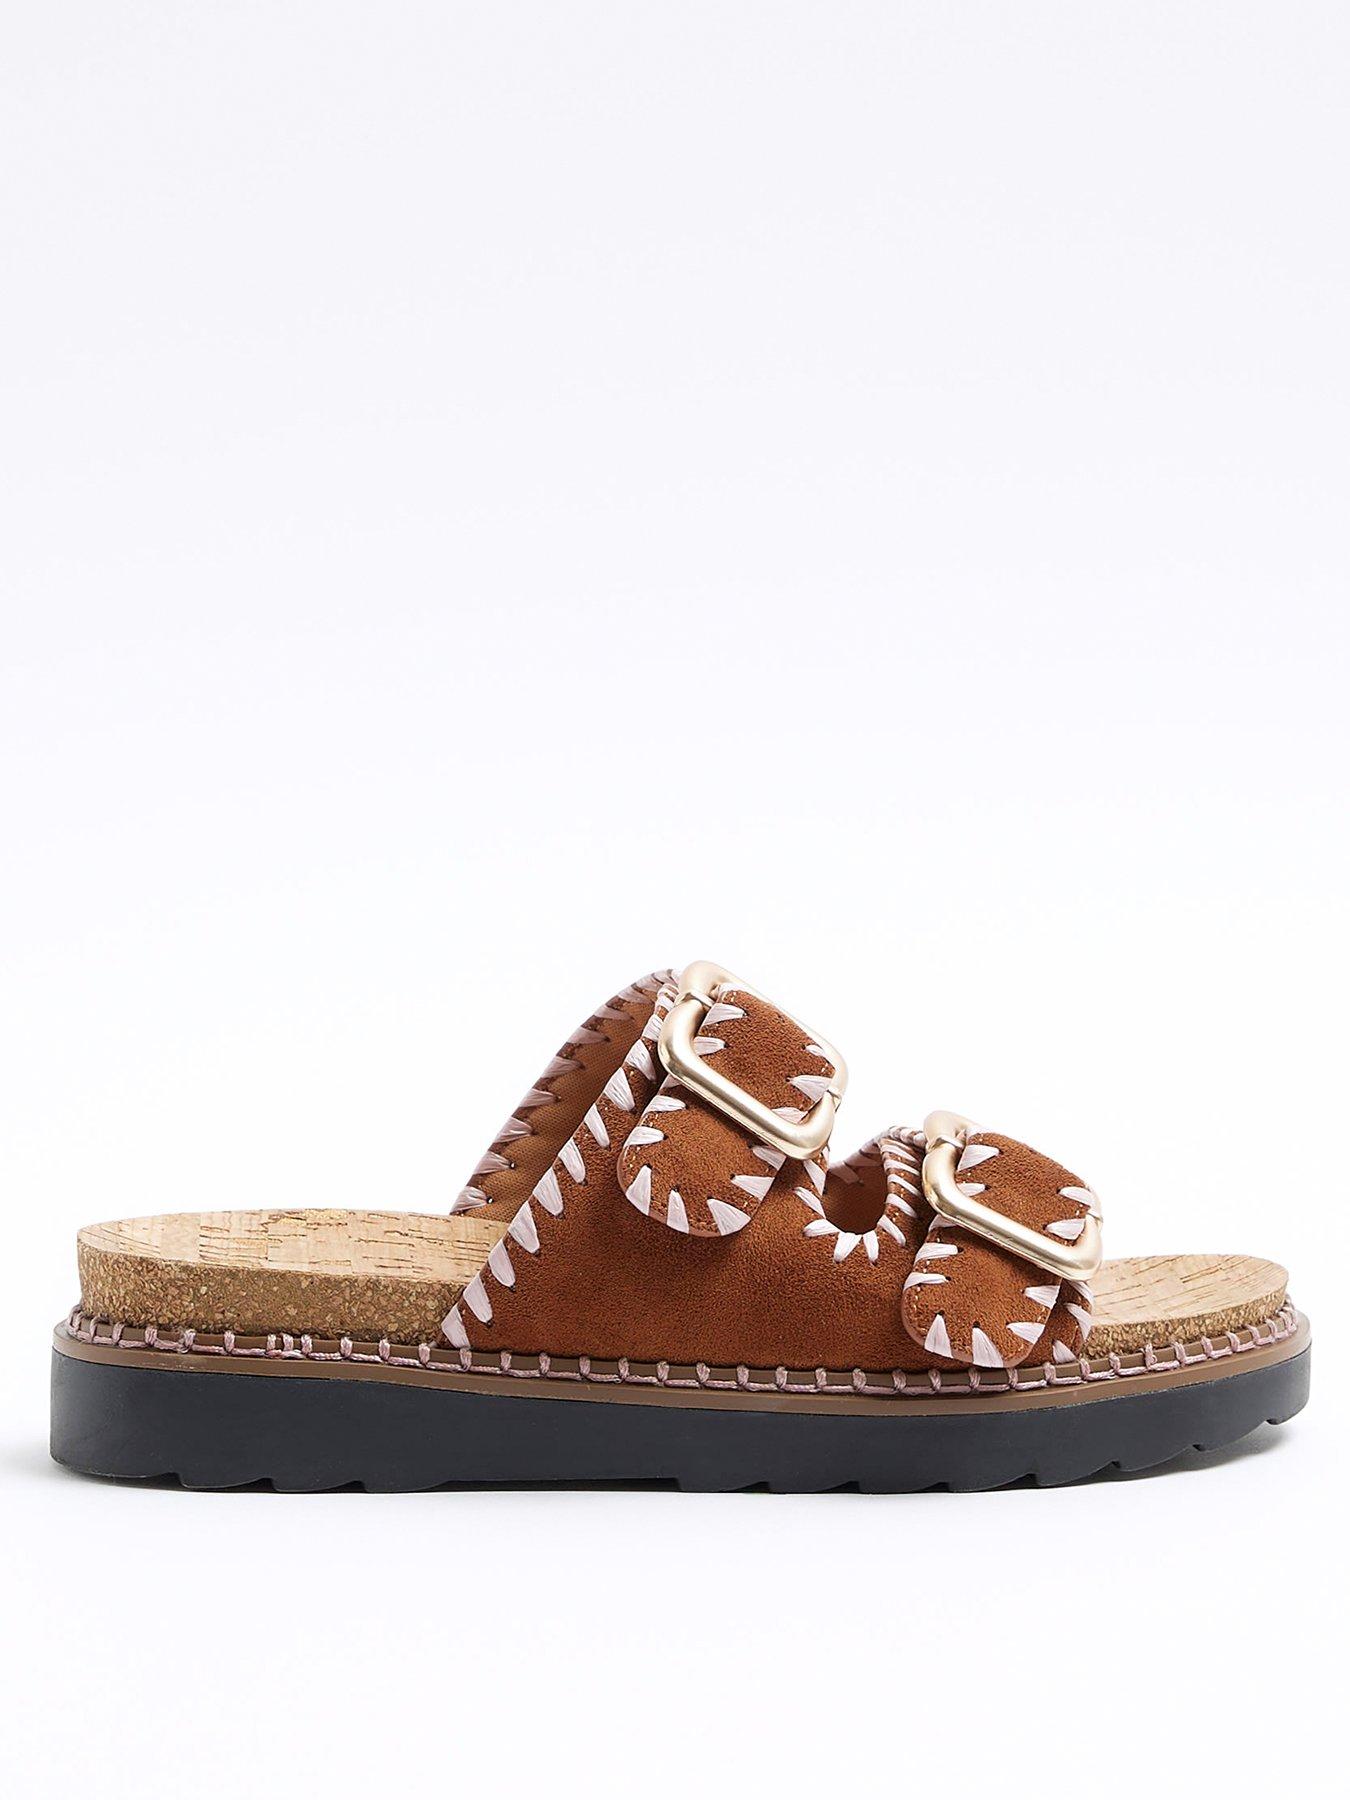 river-island-double-buckle-sandal-brown